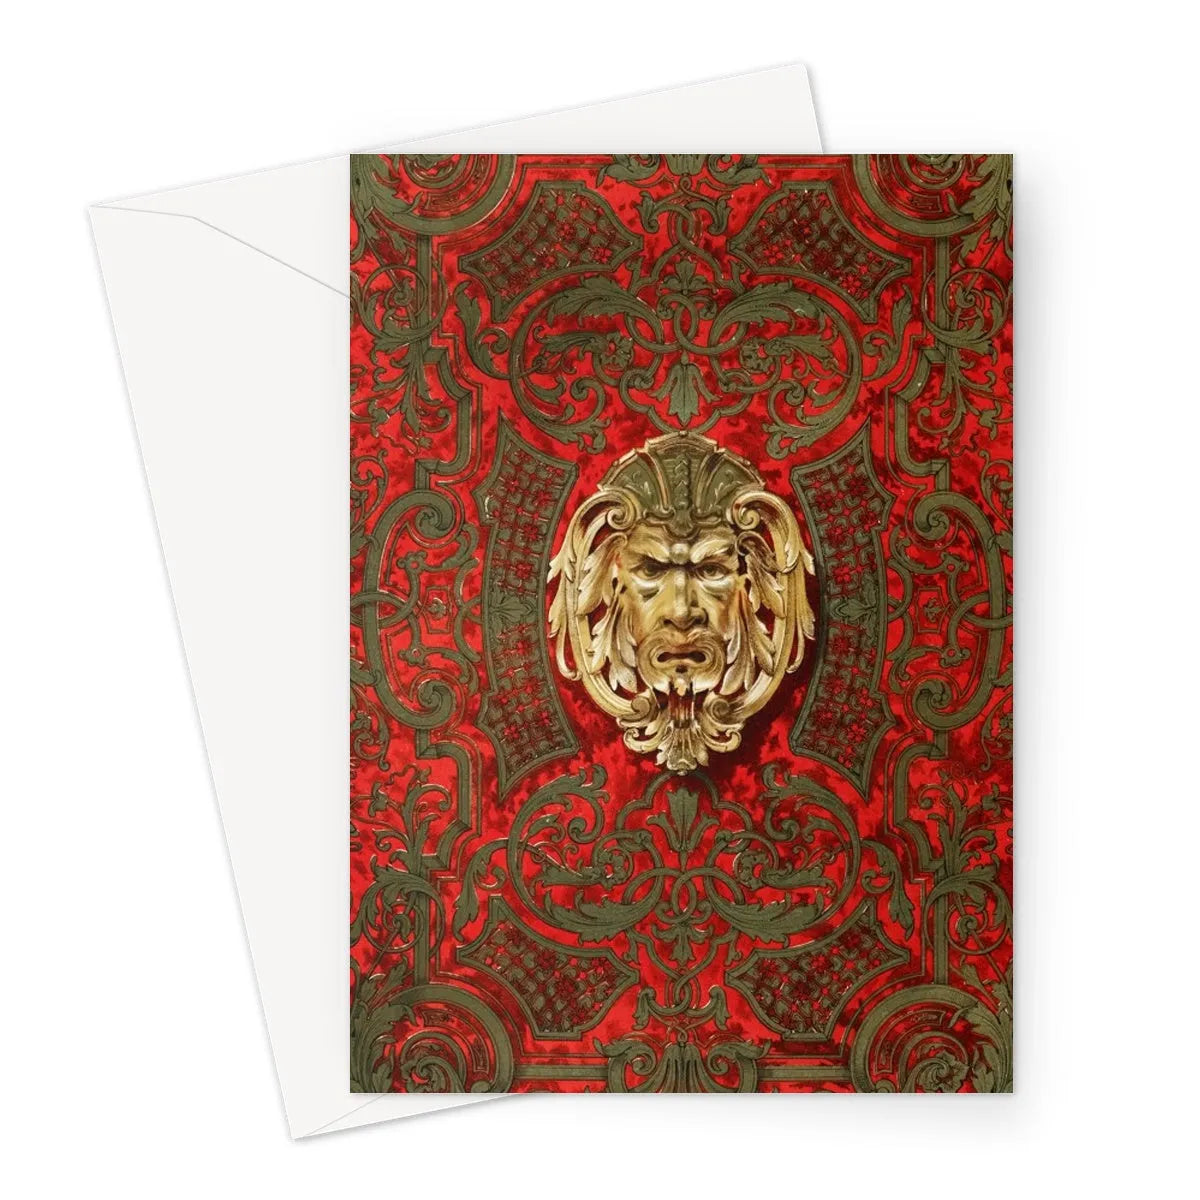 Panel In Buhl By Sir Matthew Digby Wyatt Greeting Card - A5 Portrait / 1 Card - Greeting & Note Cards - Aesthetic Art